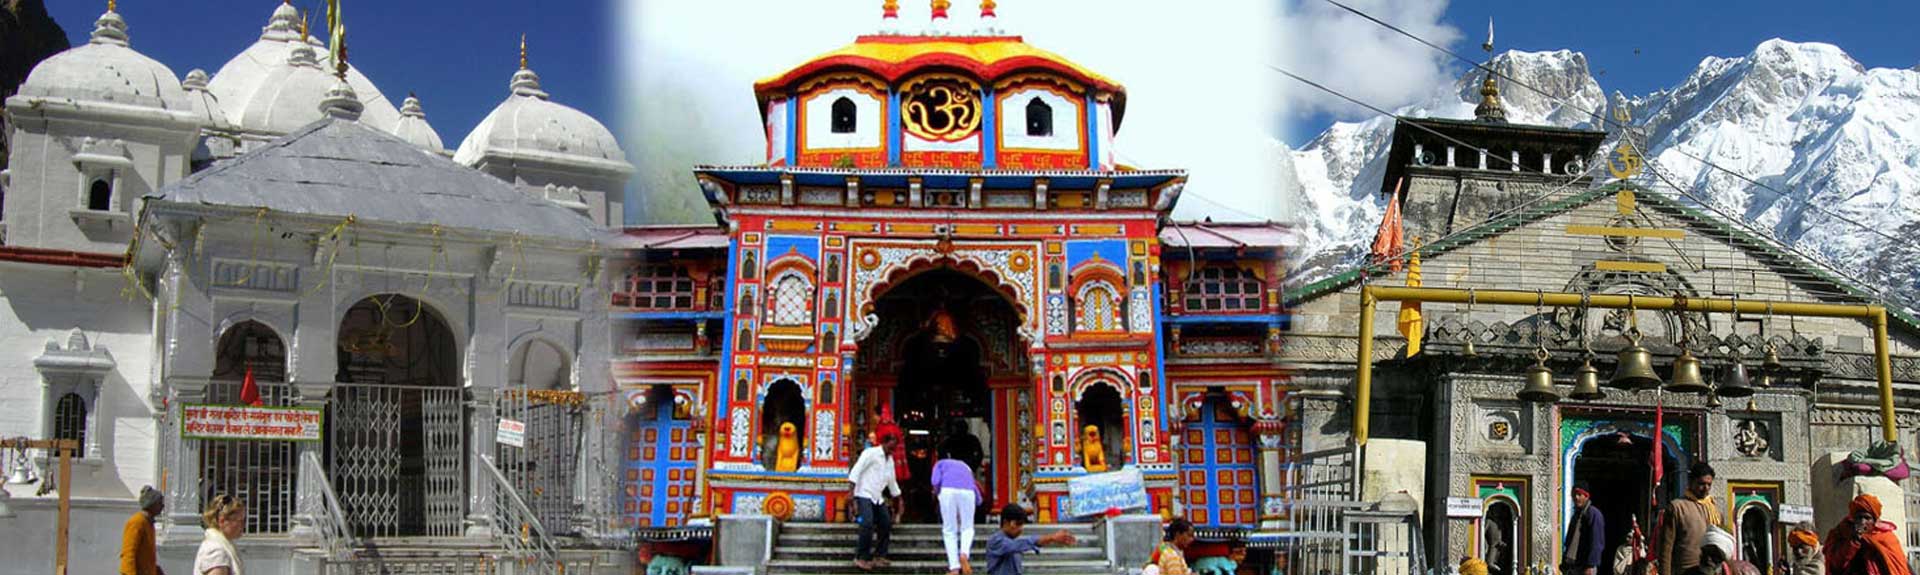 char dham yatra package cost